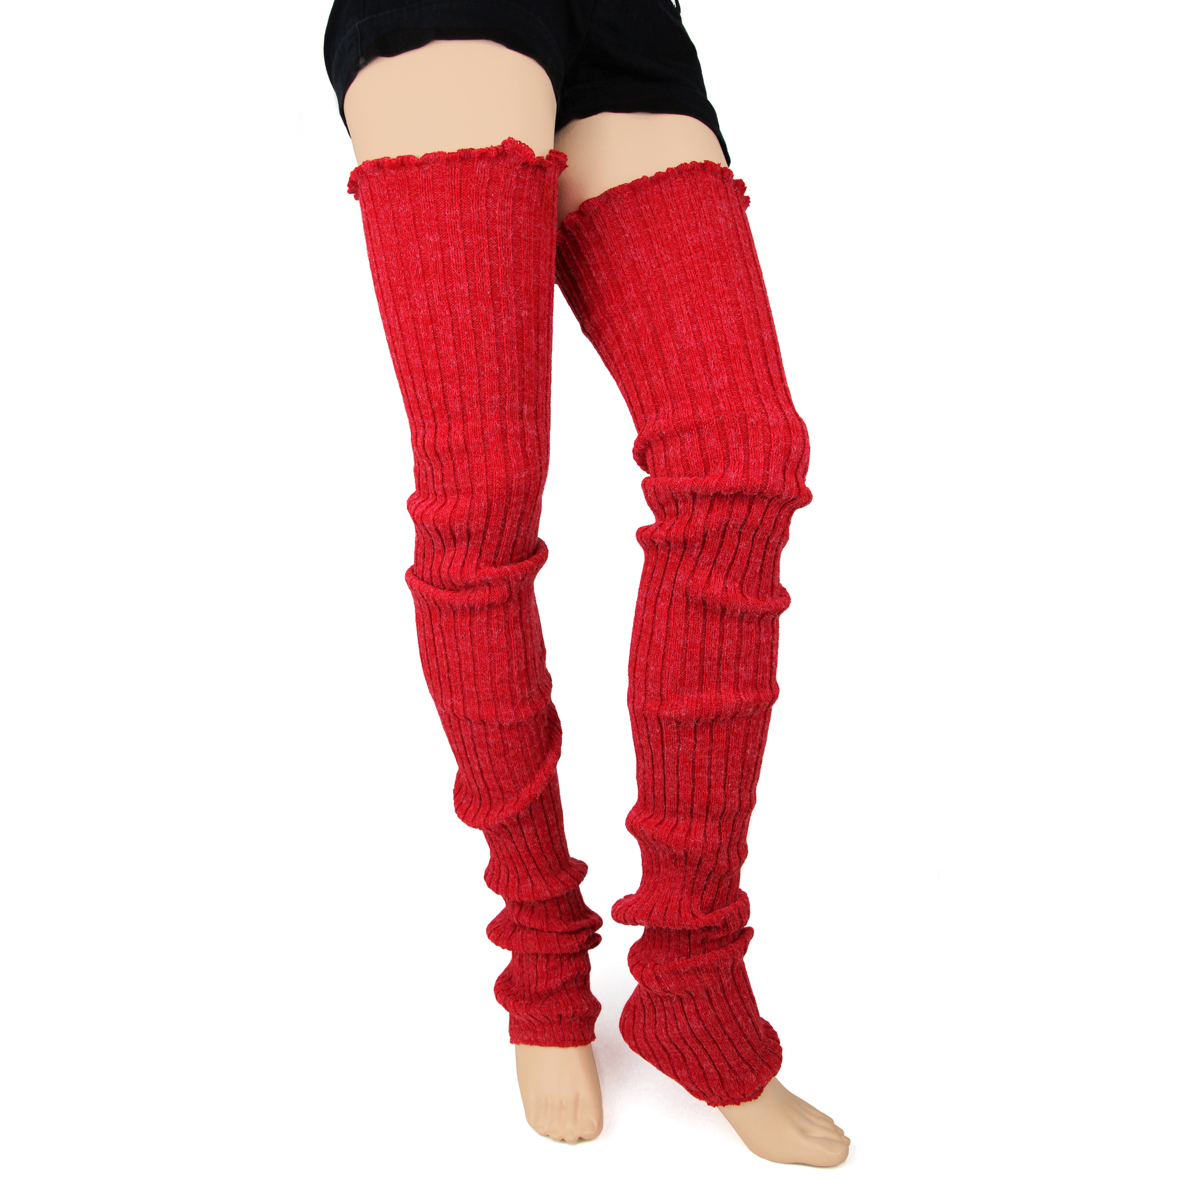 Best Cable Knit Leg Warmers for Cozy Winter Style | Foot Traffic